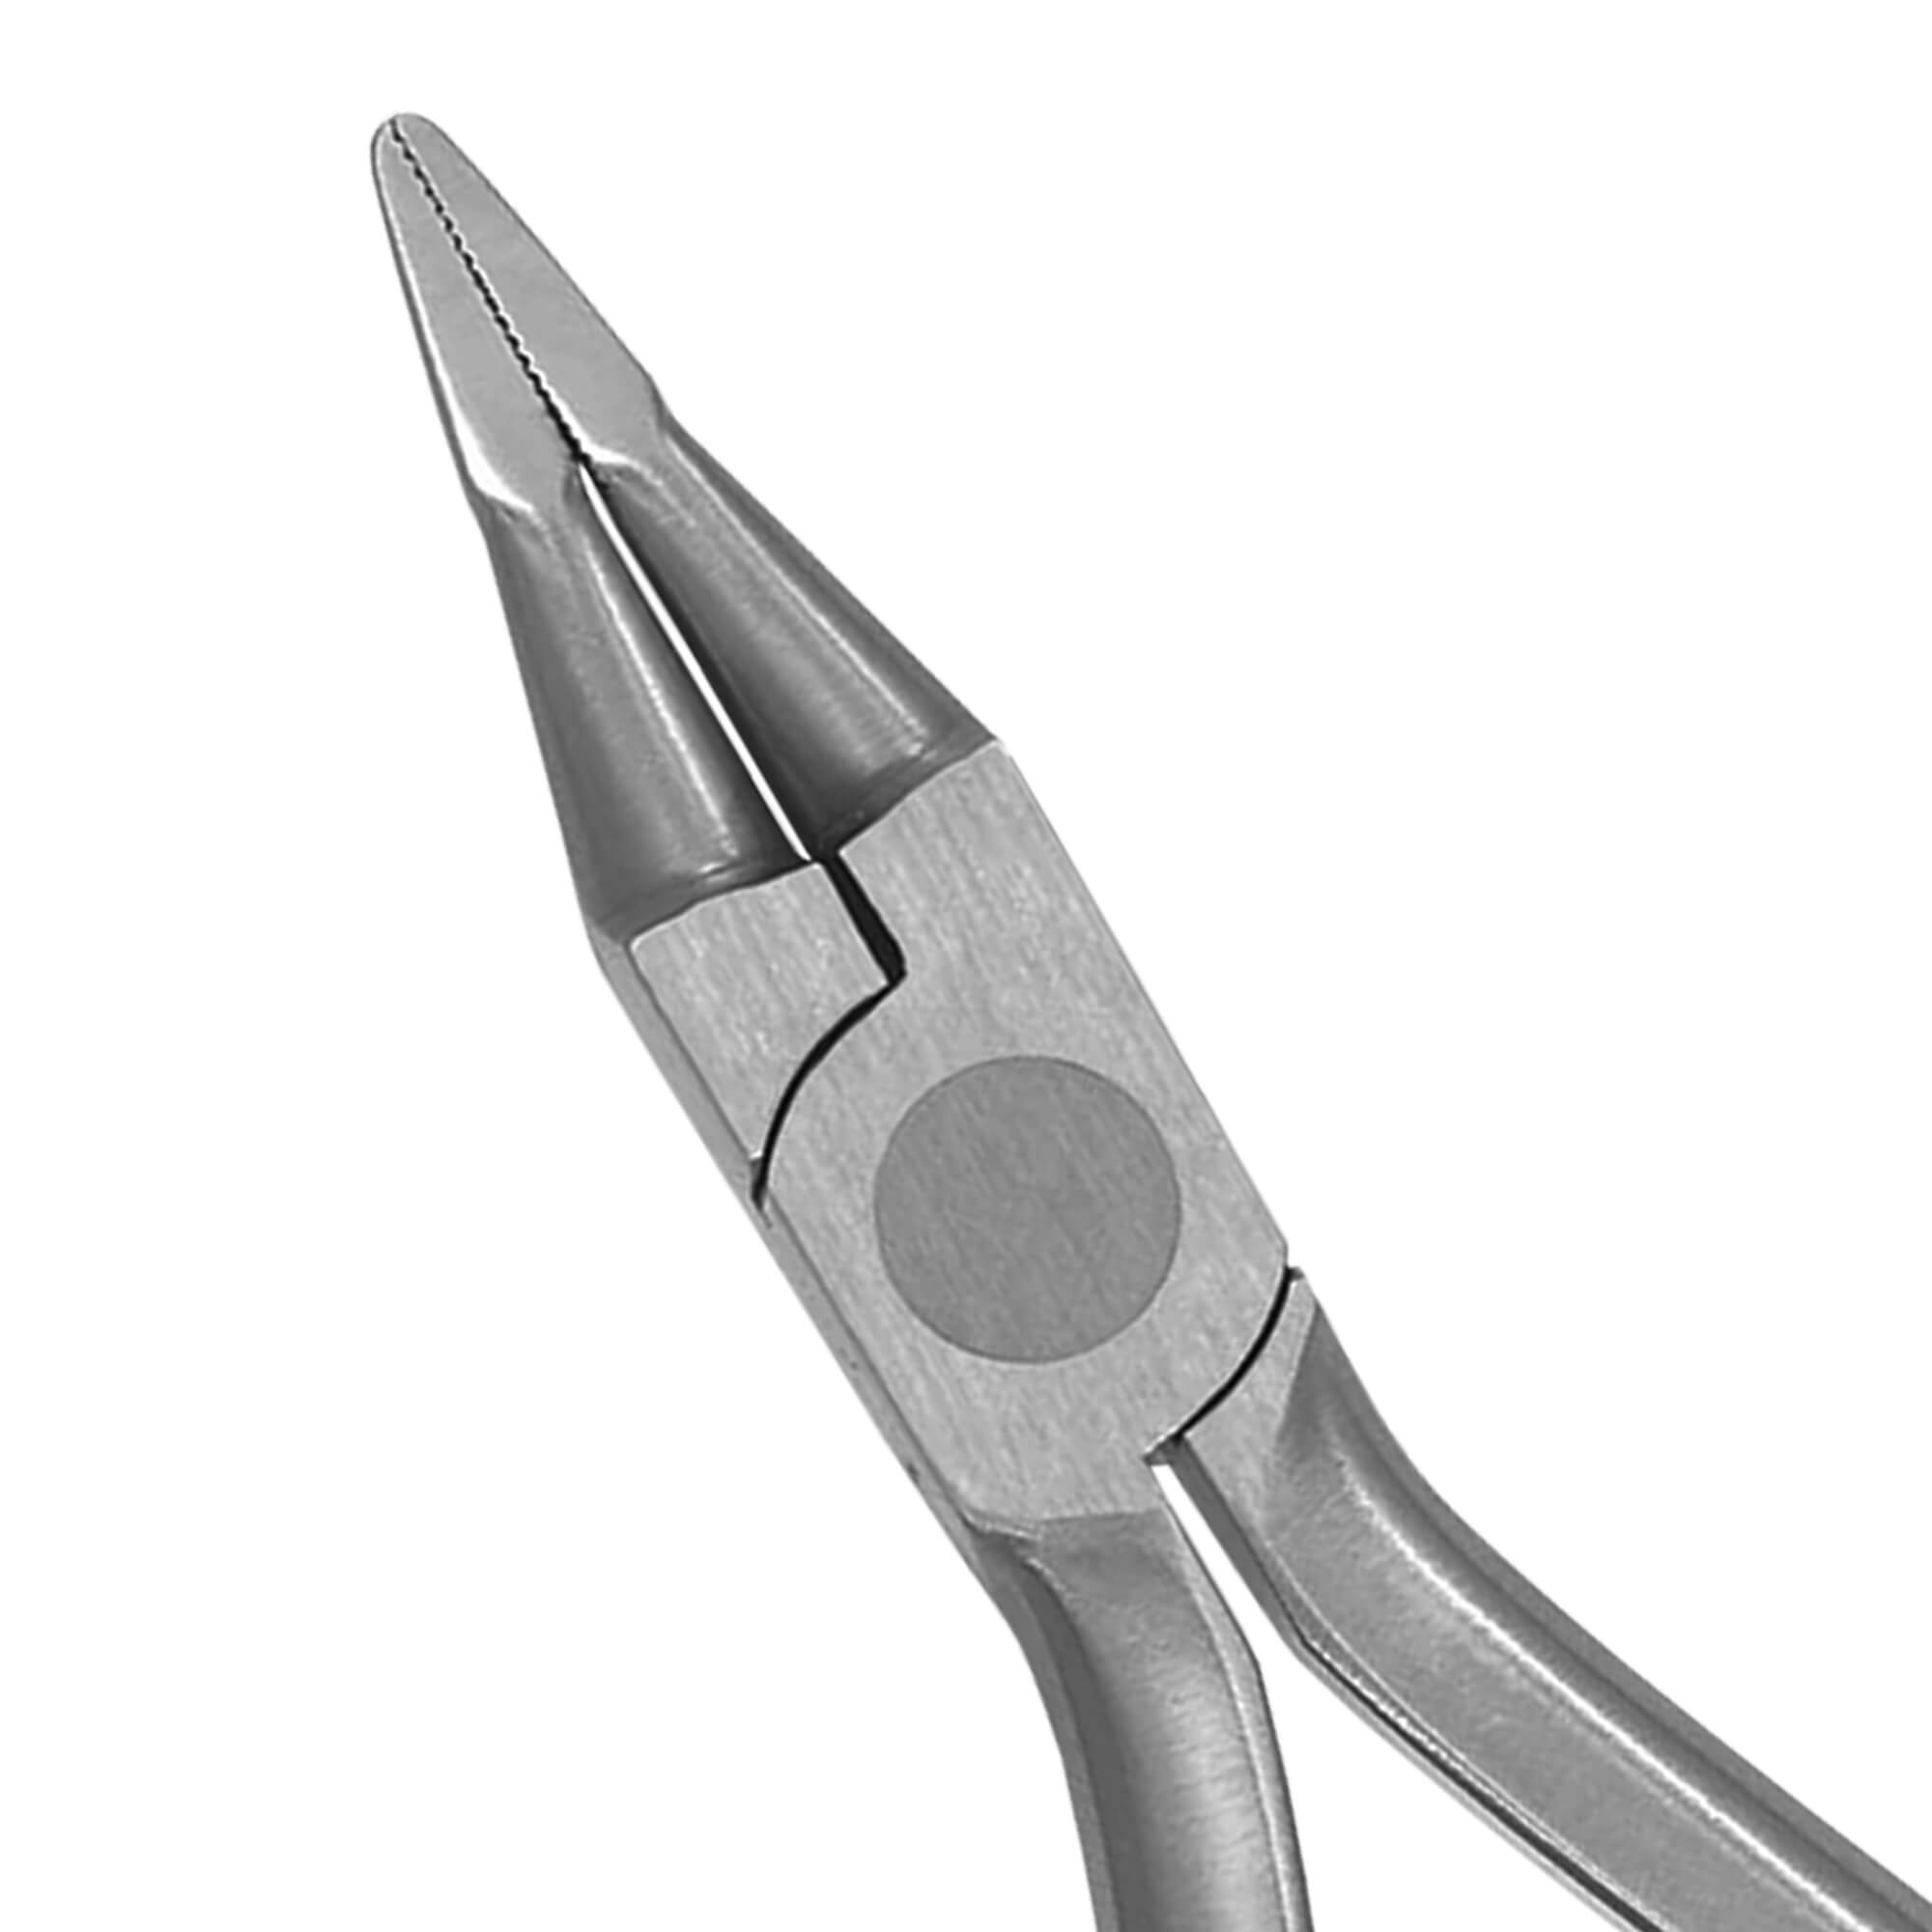 Harting Crimping Pliers – Thomann United States